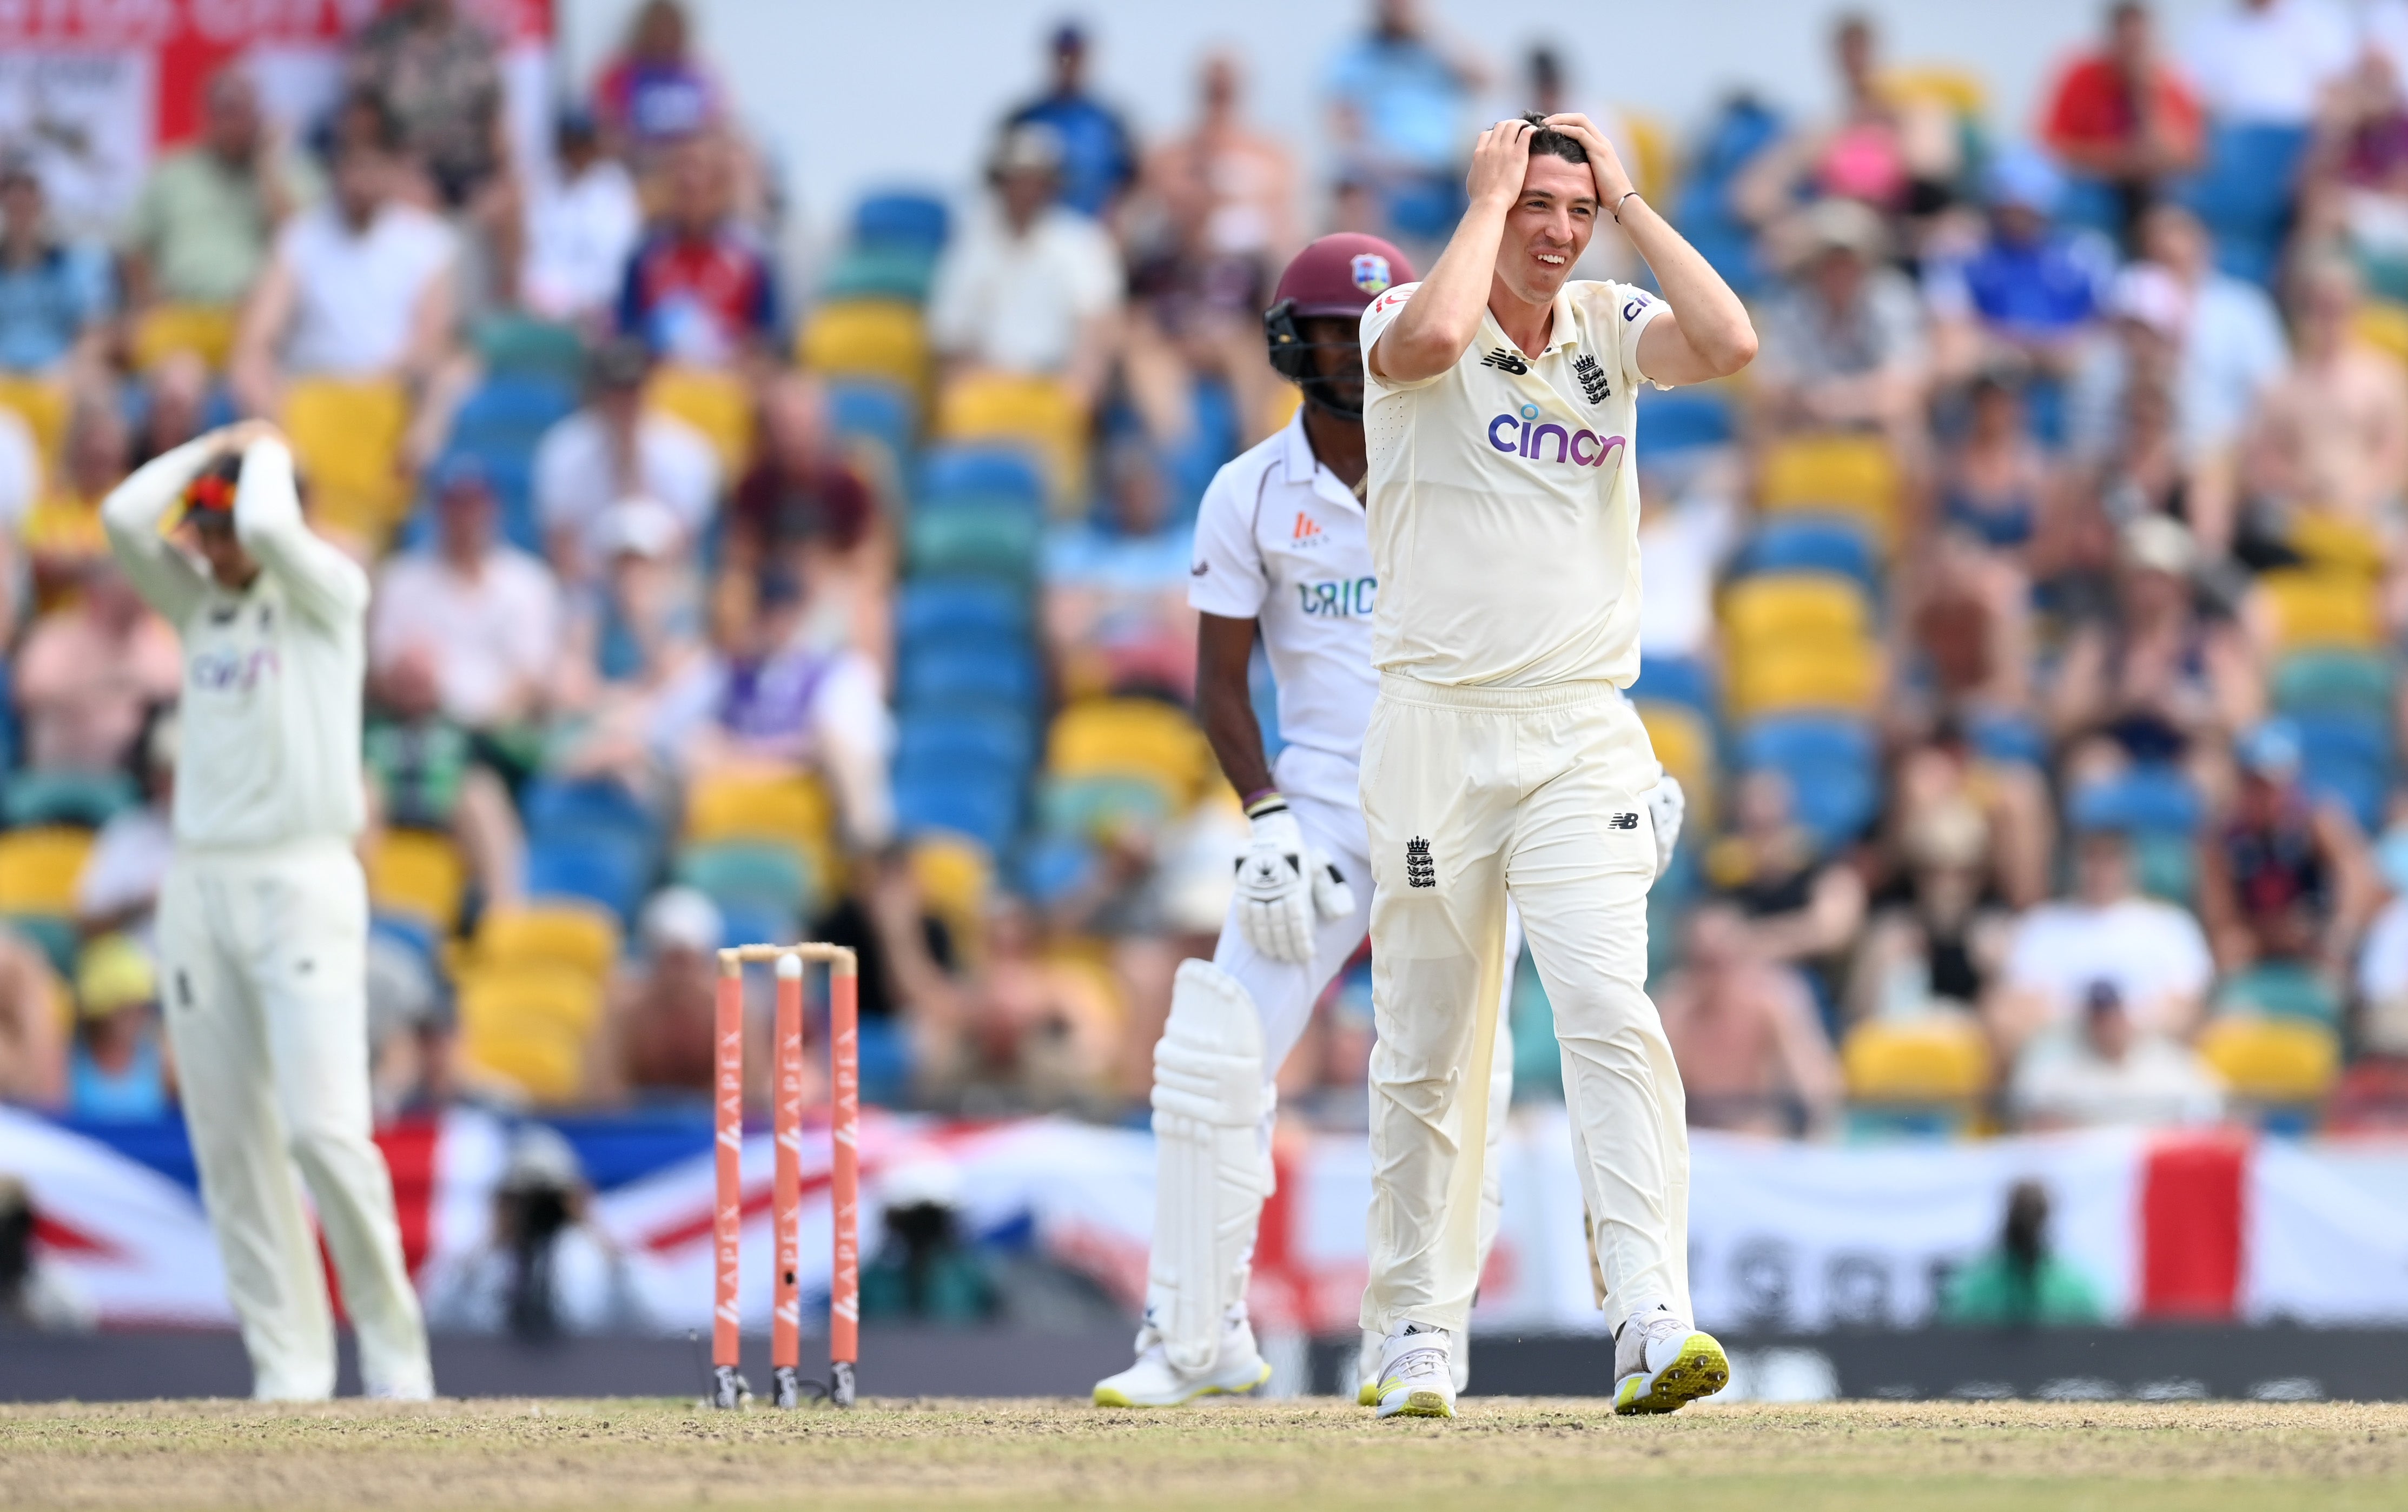 England were frustrated on day four of the second Test